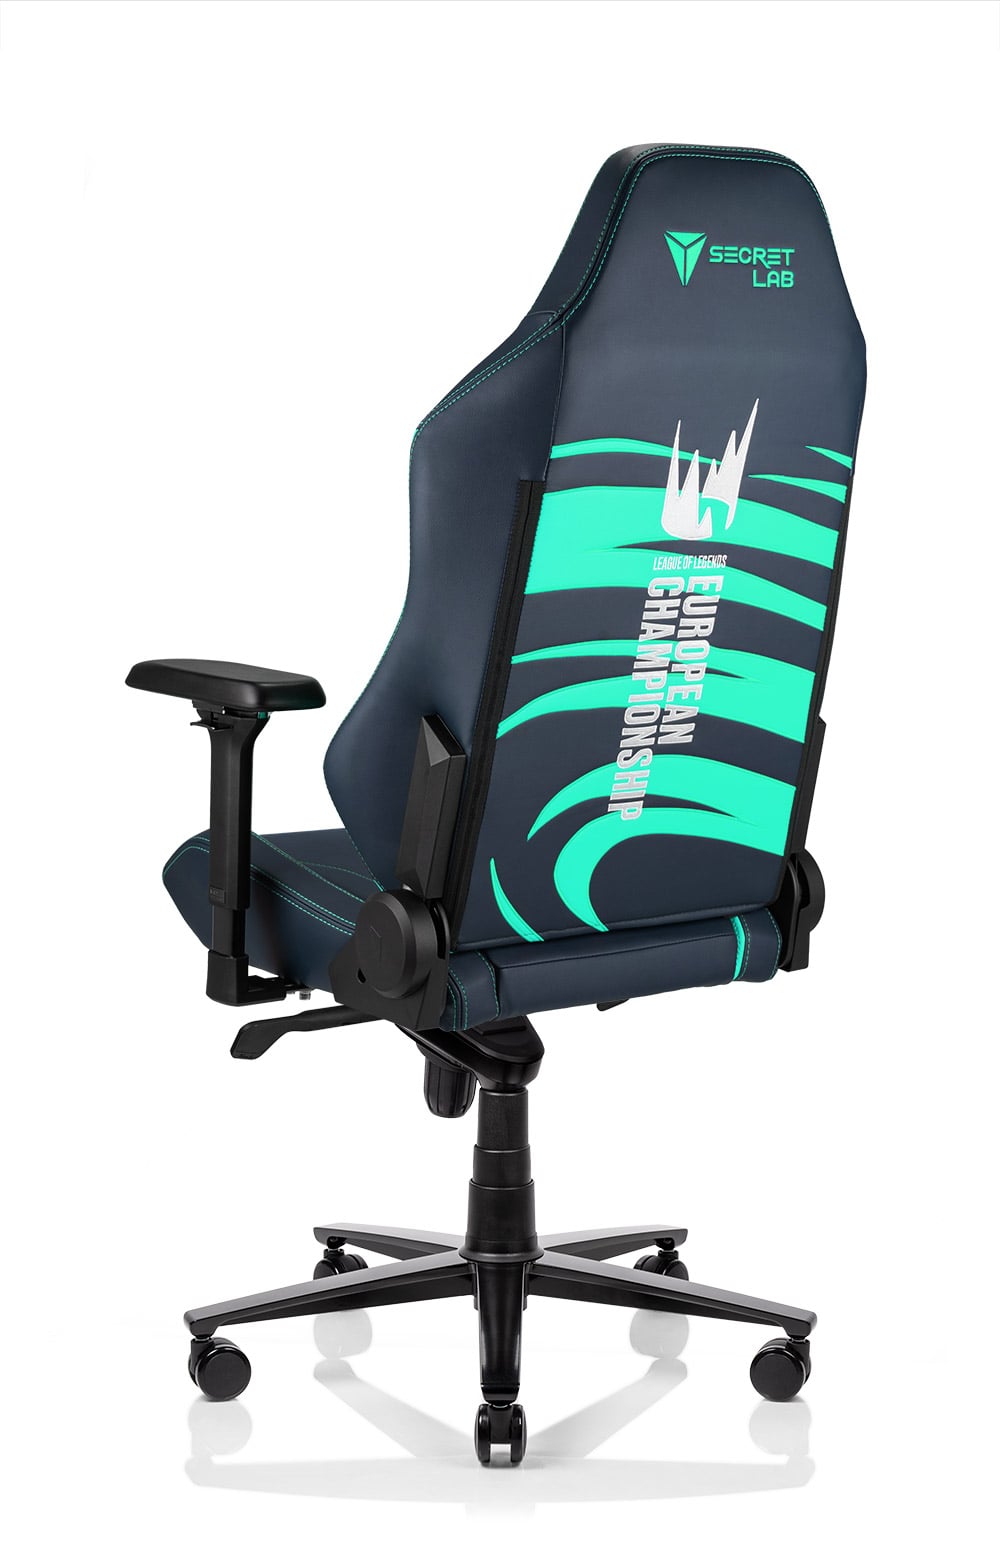 will these secret lab skins fit the 2020 version of chairs? I have a kitten  and could really use one. : r/secretlab